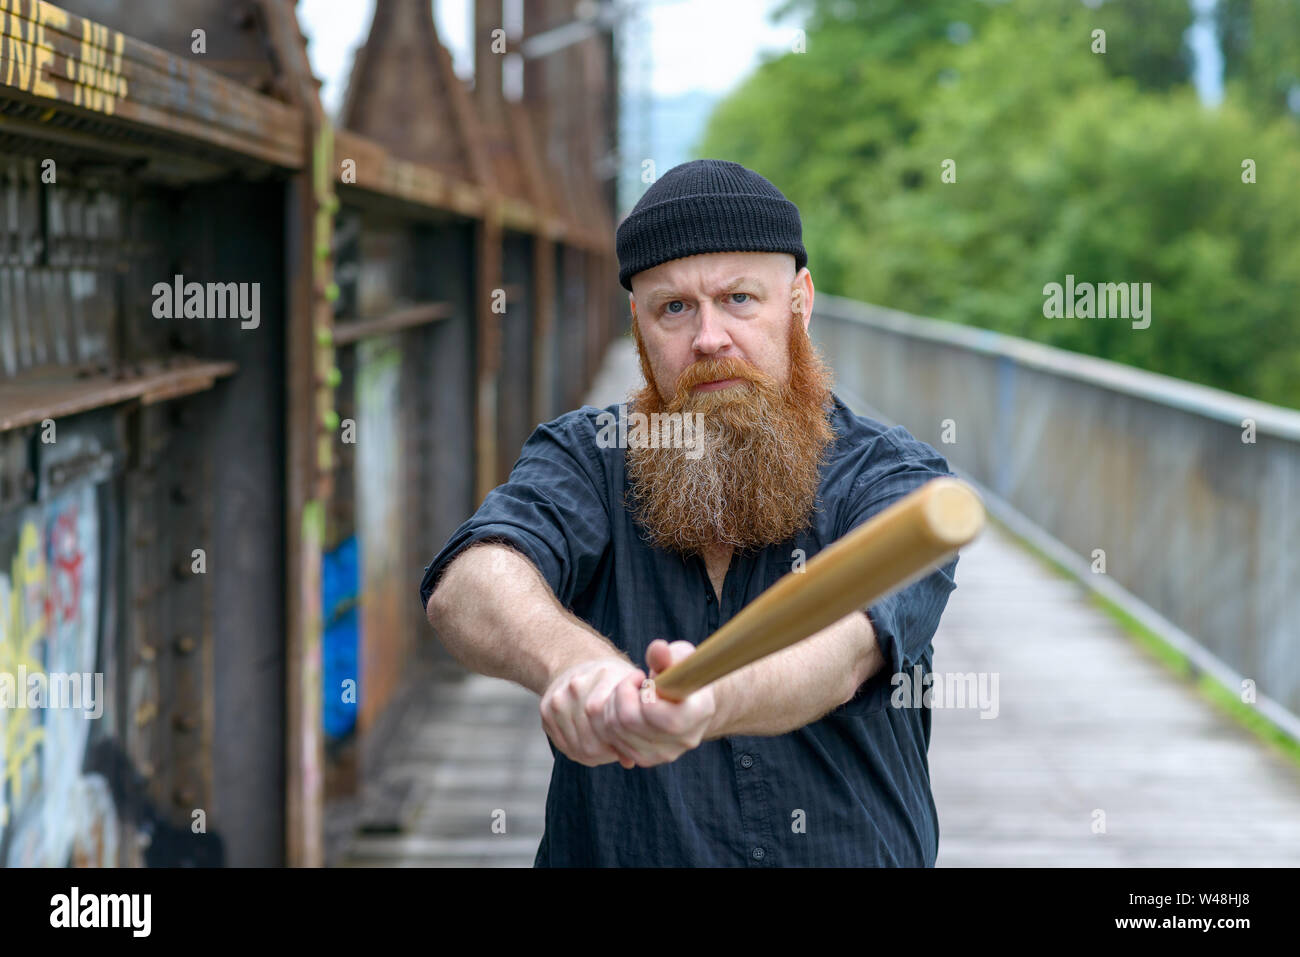 Aggressive bearded man in knitted beanie hat swinging a baseball bat at the camera with an angry expression outdoors on a bridge Stock Photo